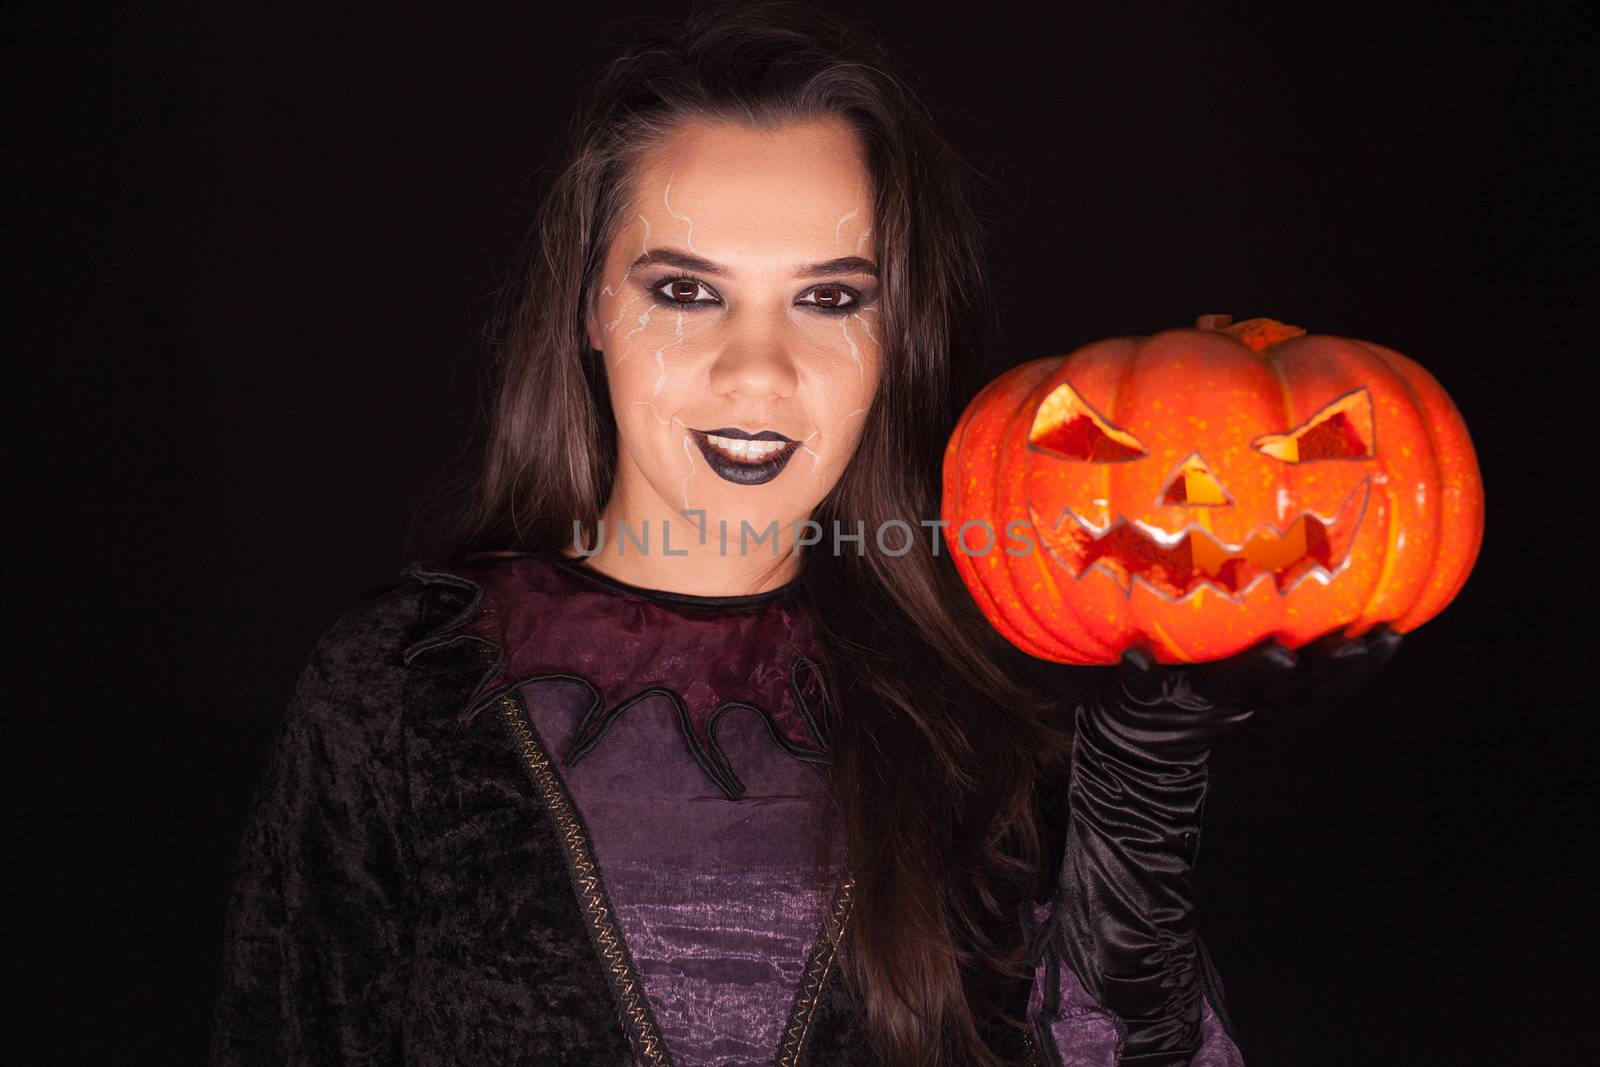 Lady in witch costume holding a pumpkin over black background for halloween.